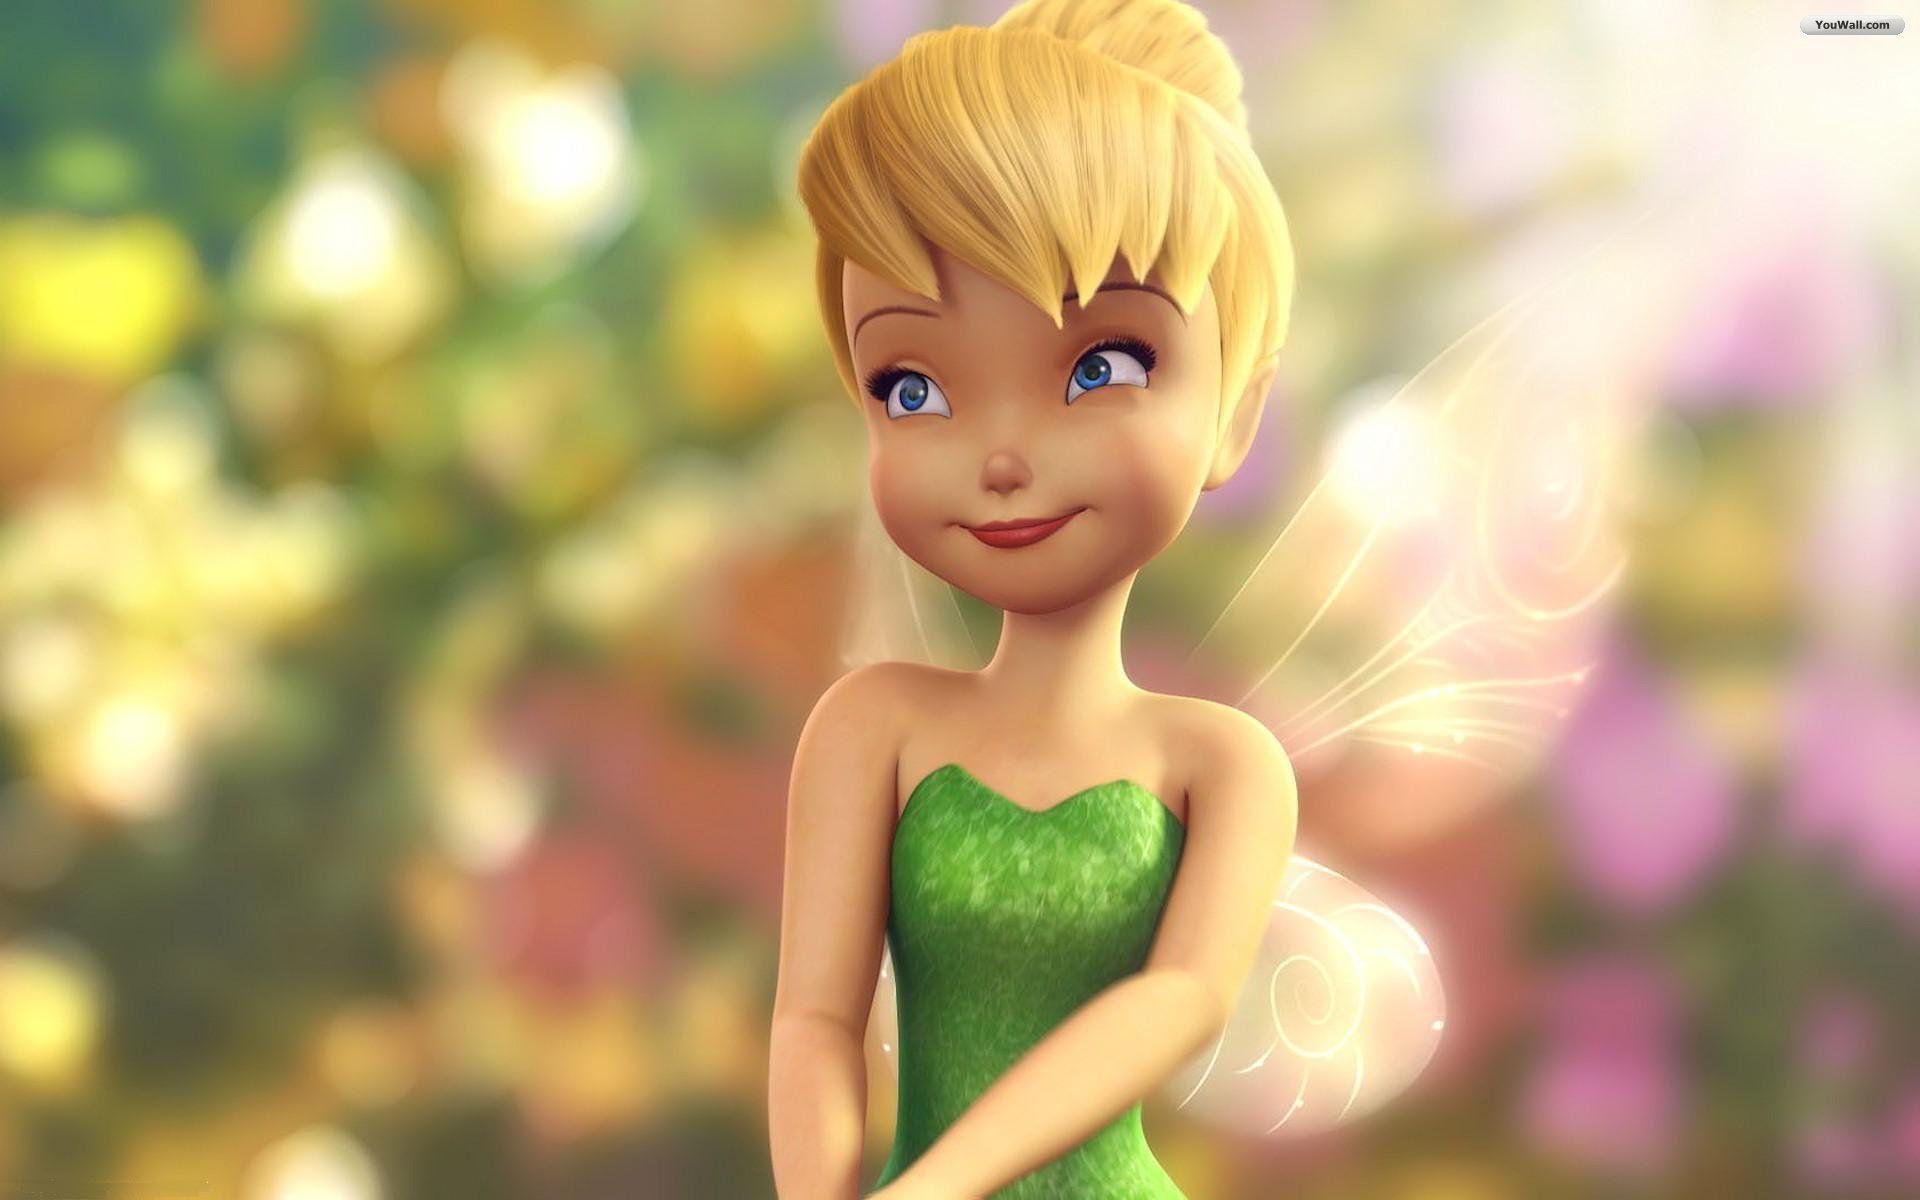 Tinkerbell Wallpaper For Desk HD Picture. Top Wallpaper